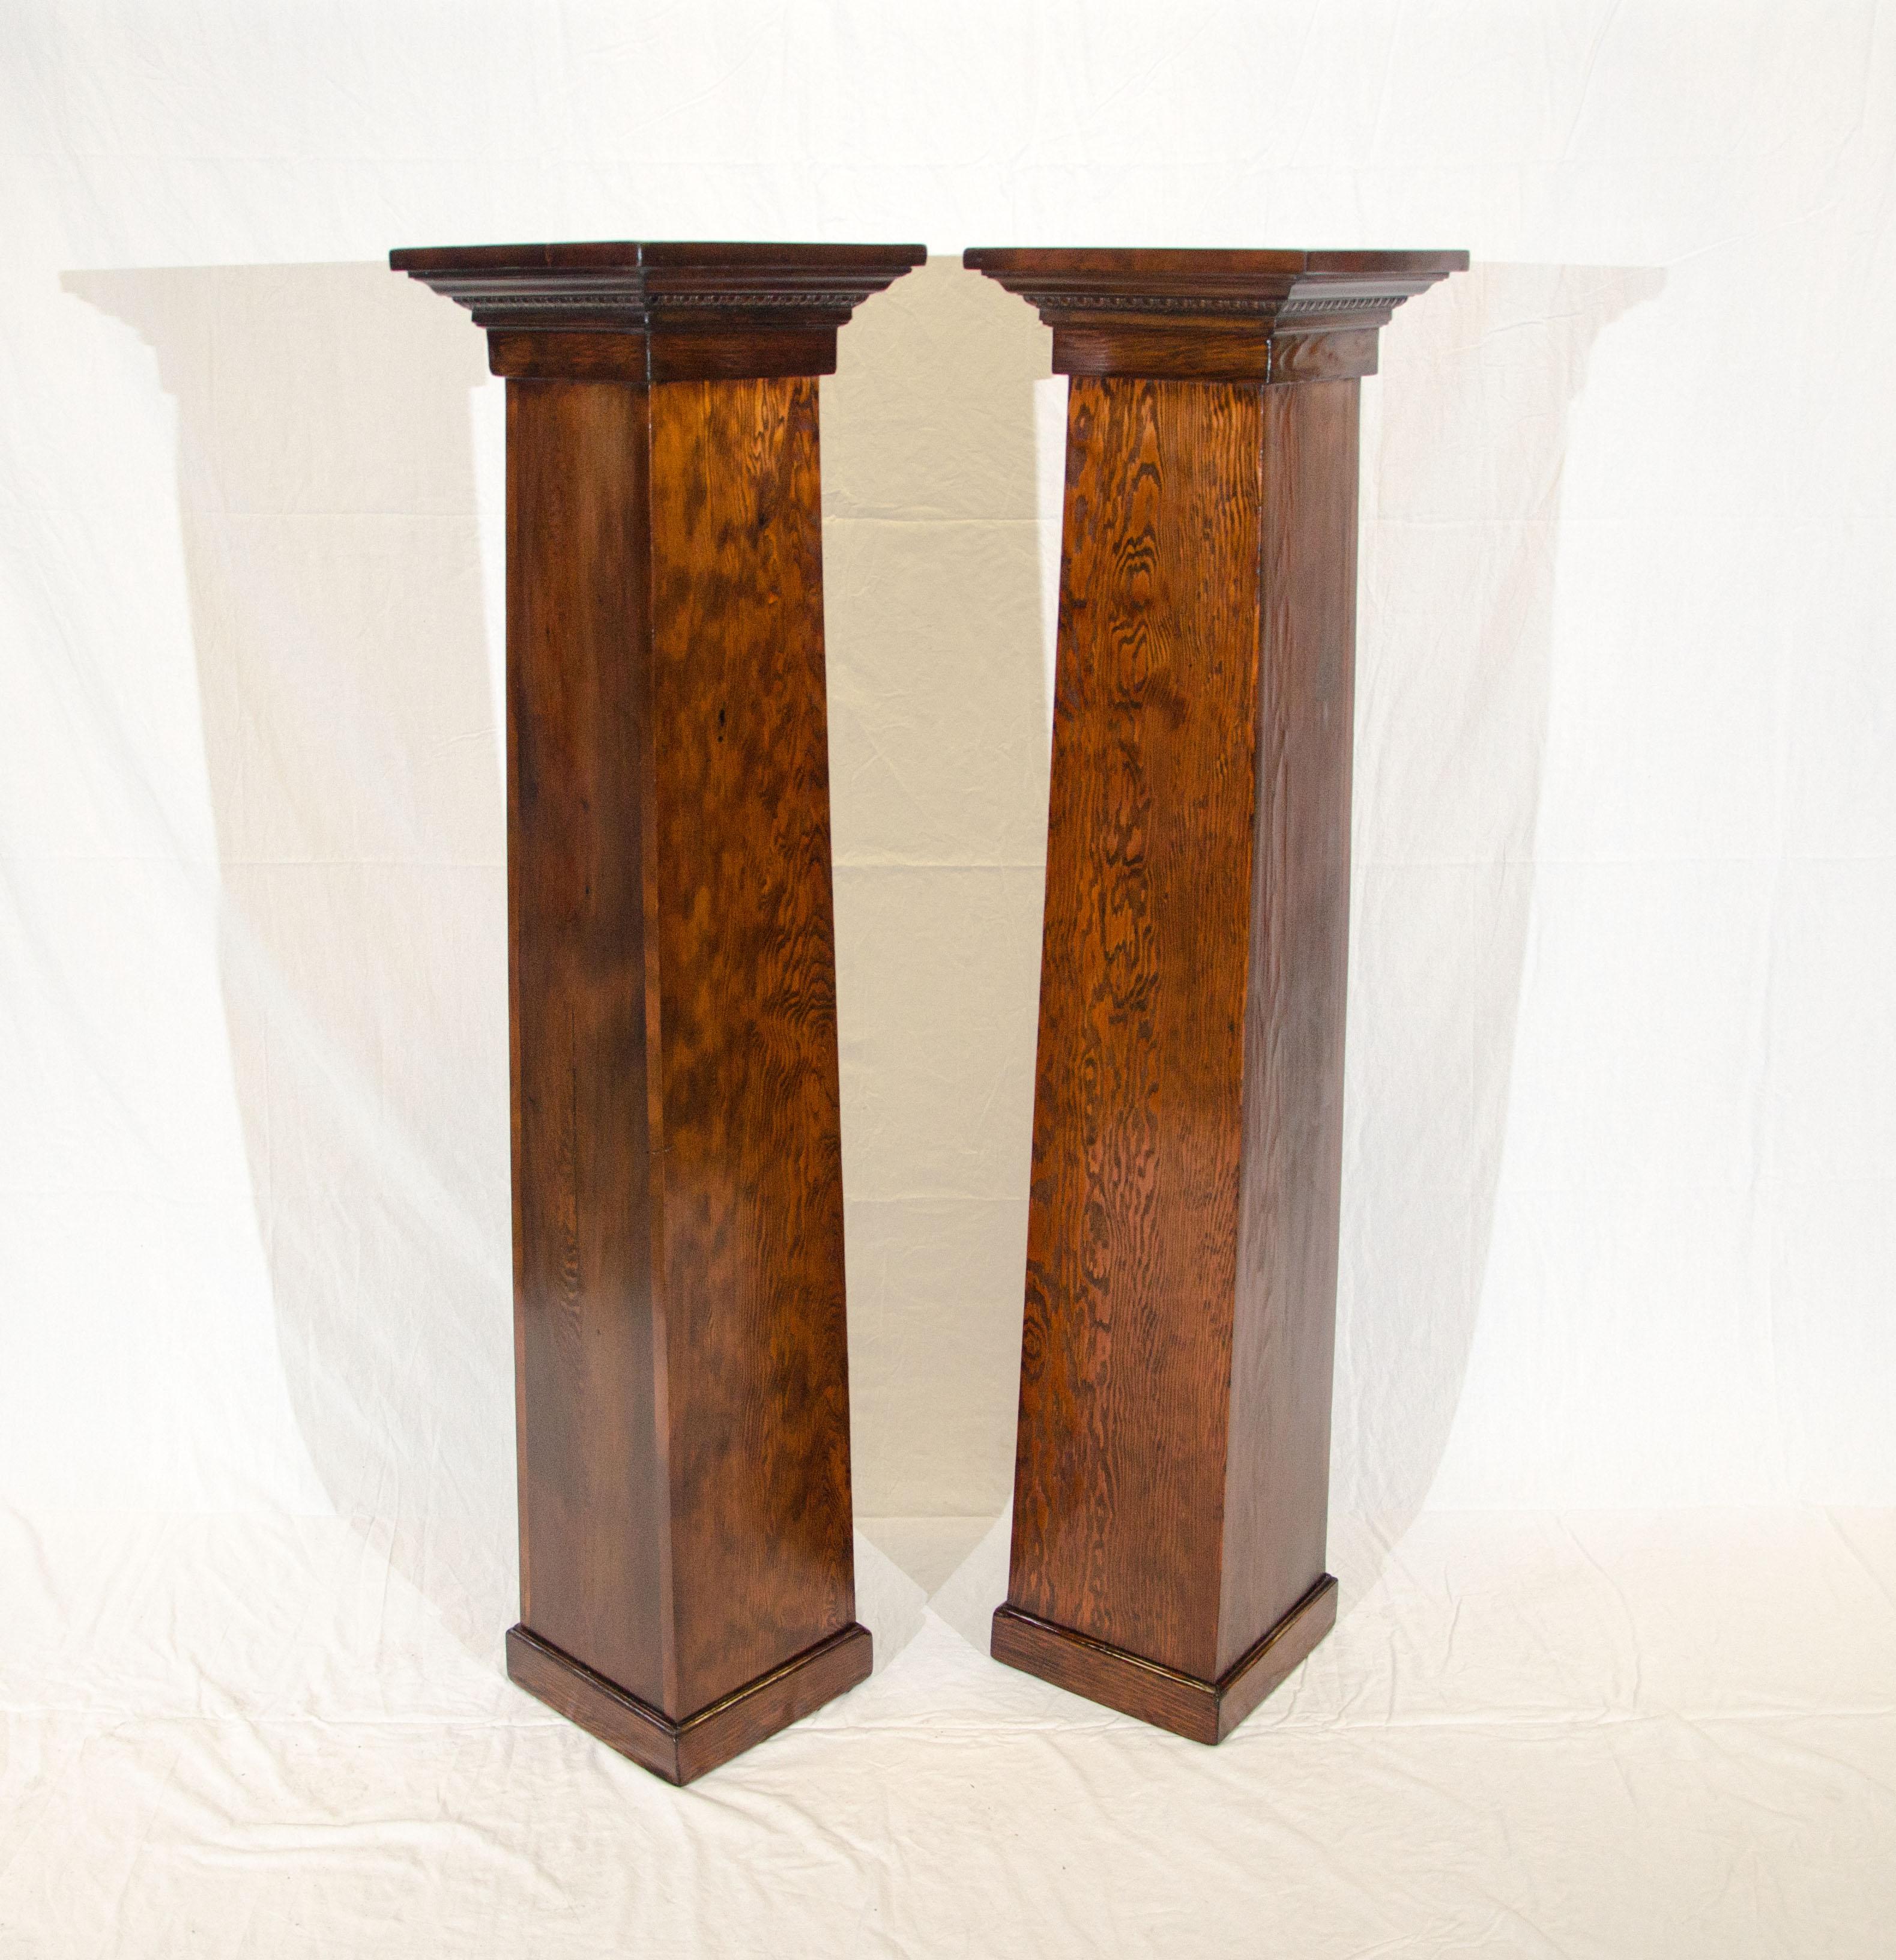 Pair of Fir Arts & Crafts Architectural Columns or Plant Stands 1